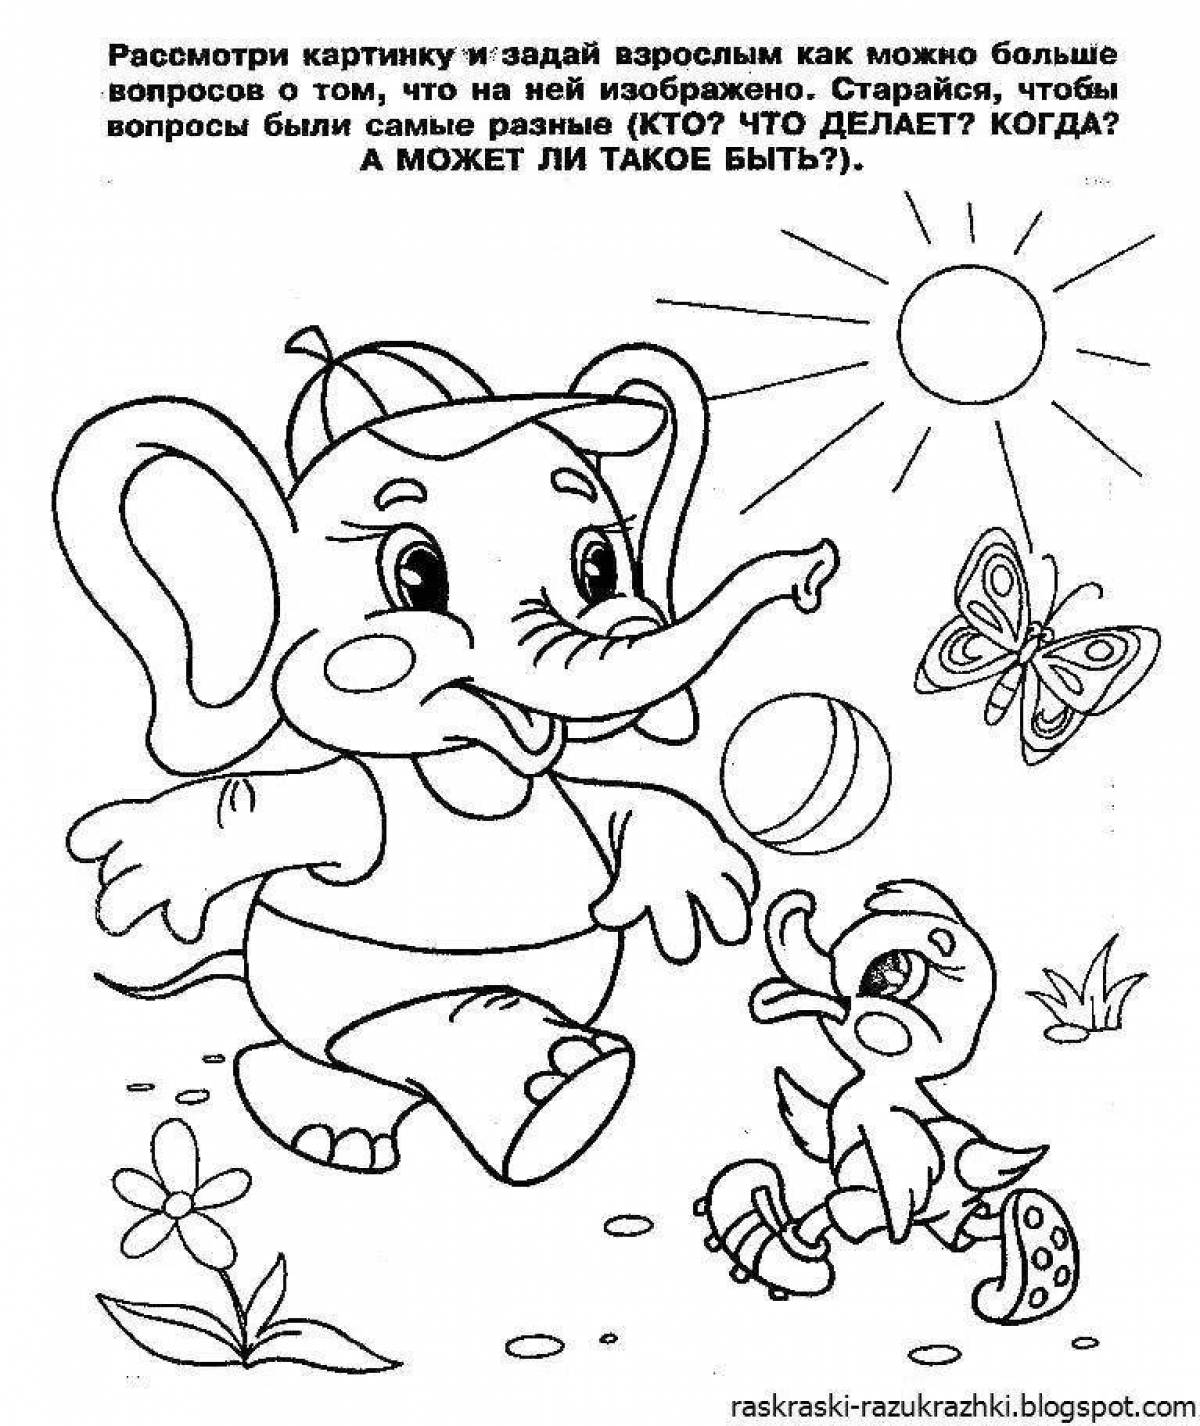 Fun coloring book for 5-6 year olds